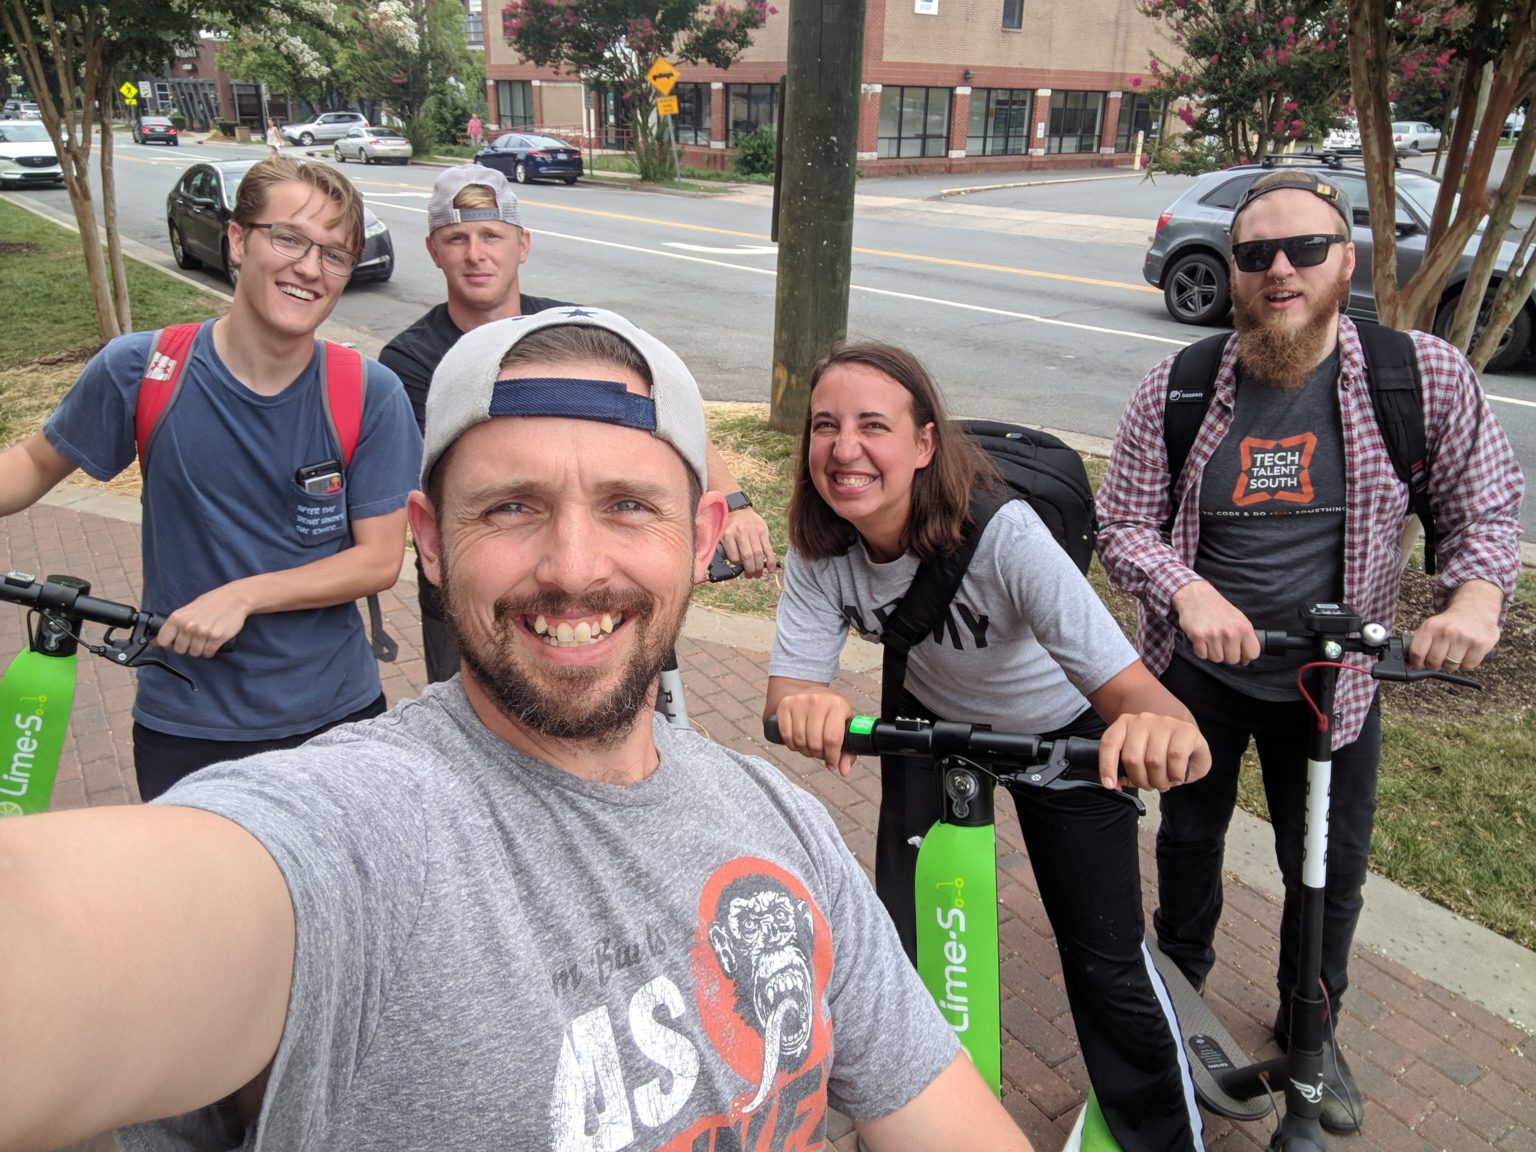 Five people posing for a selfie on scooters on a sidewalk